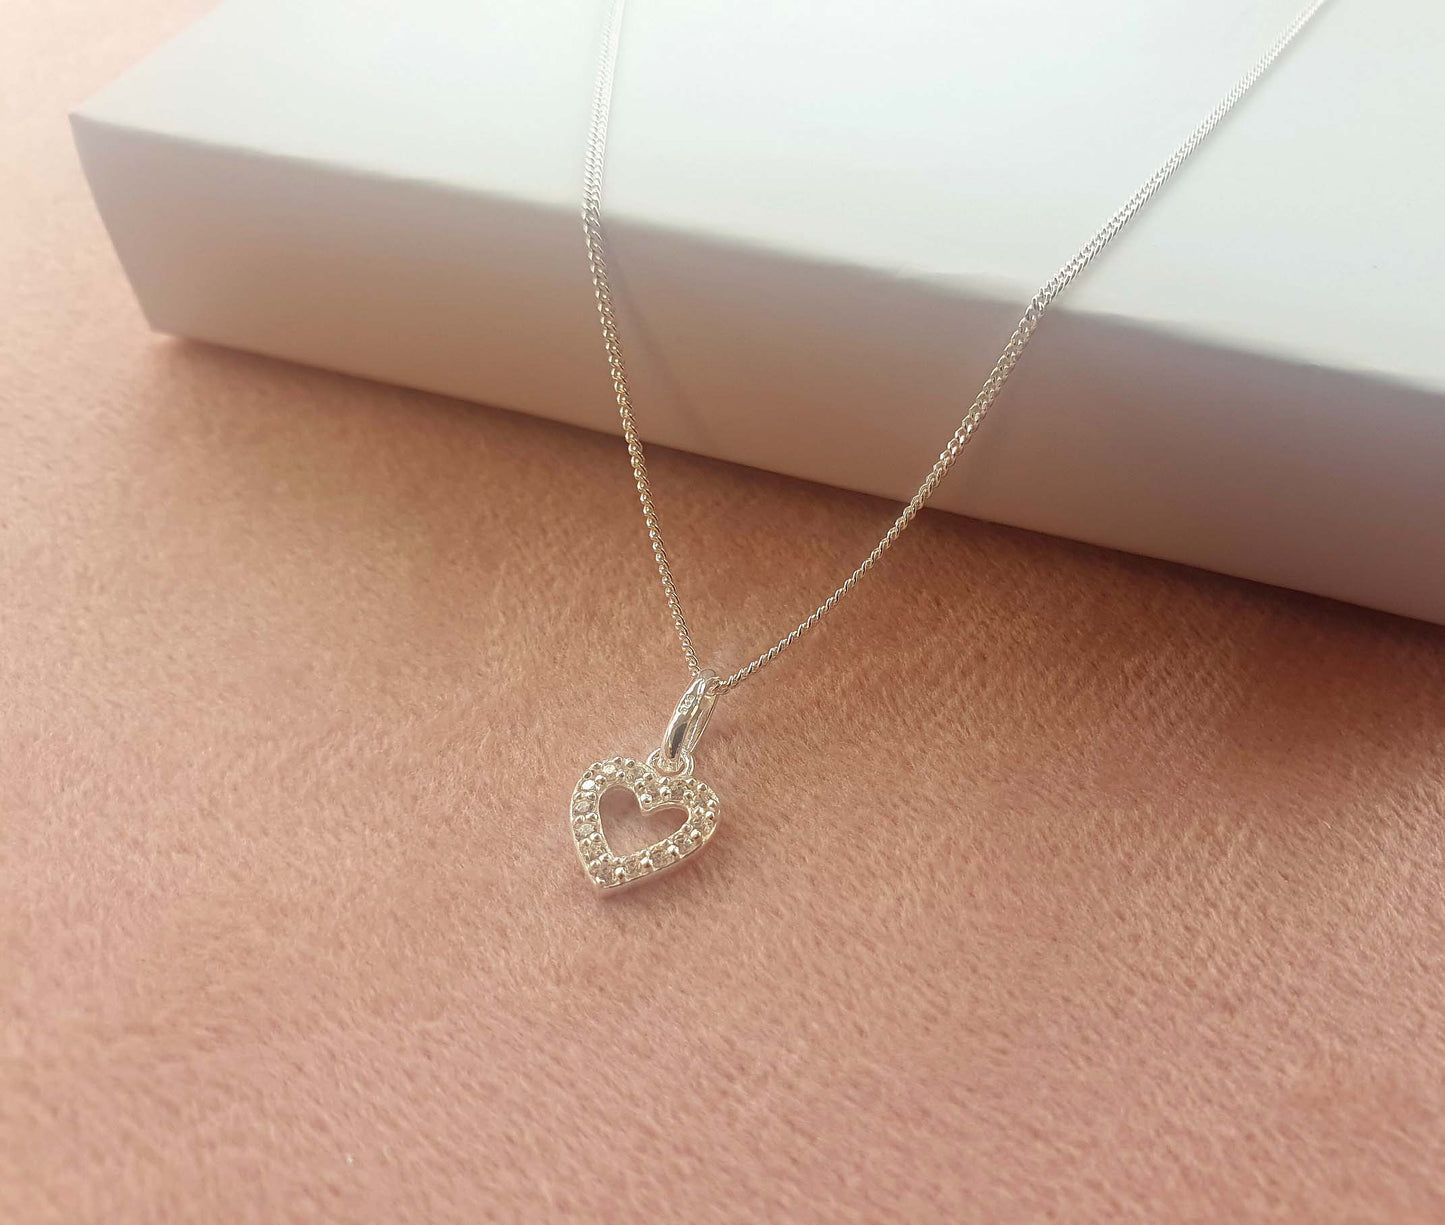 Sweet 16 Heart Necklace with Cubic Zirconia in Sterling Silver 925, Personalised Gift